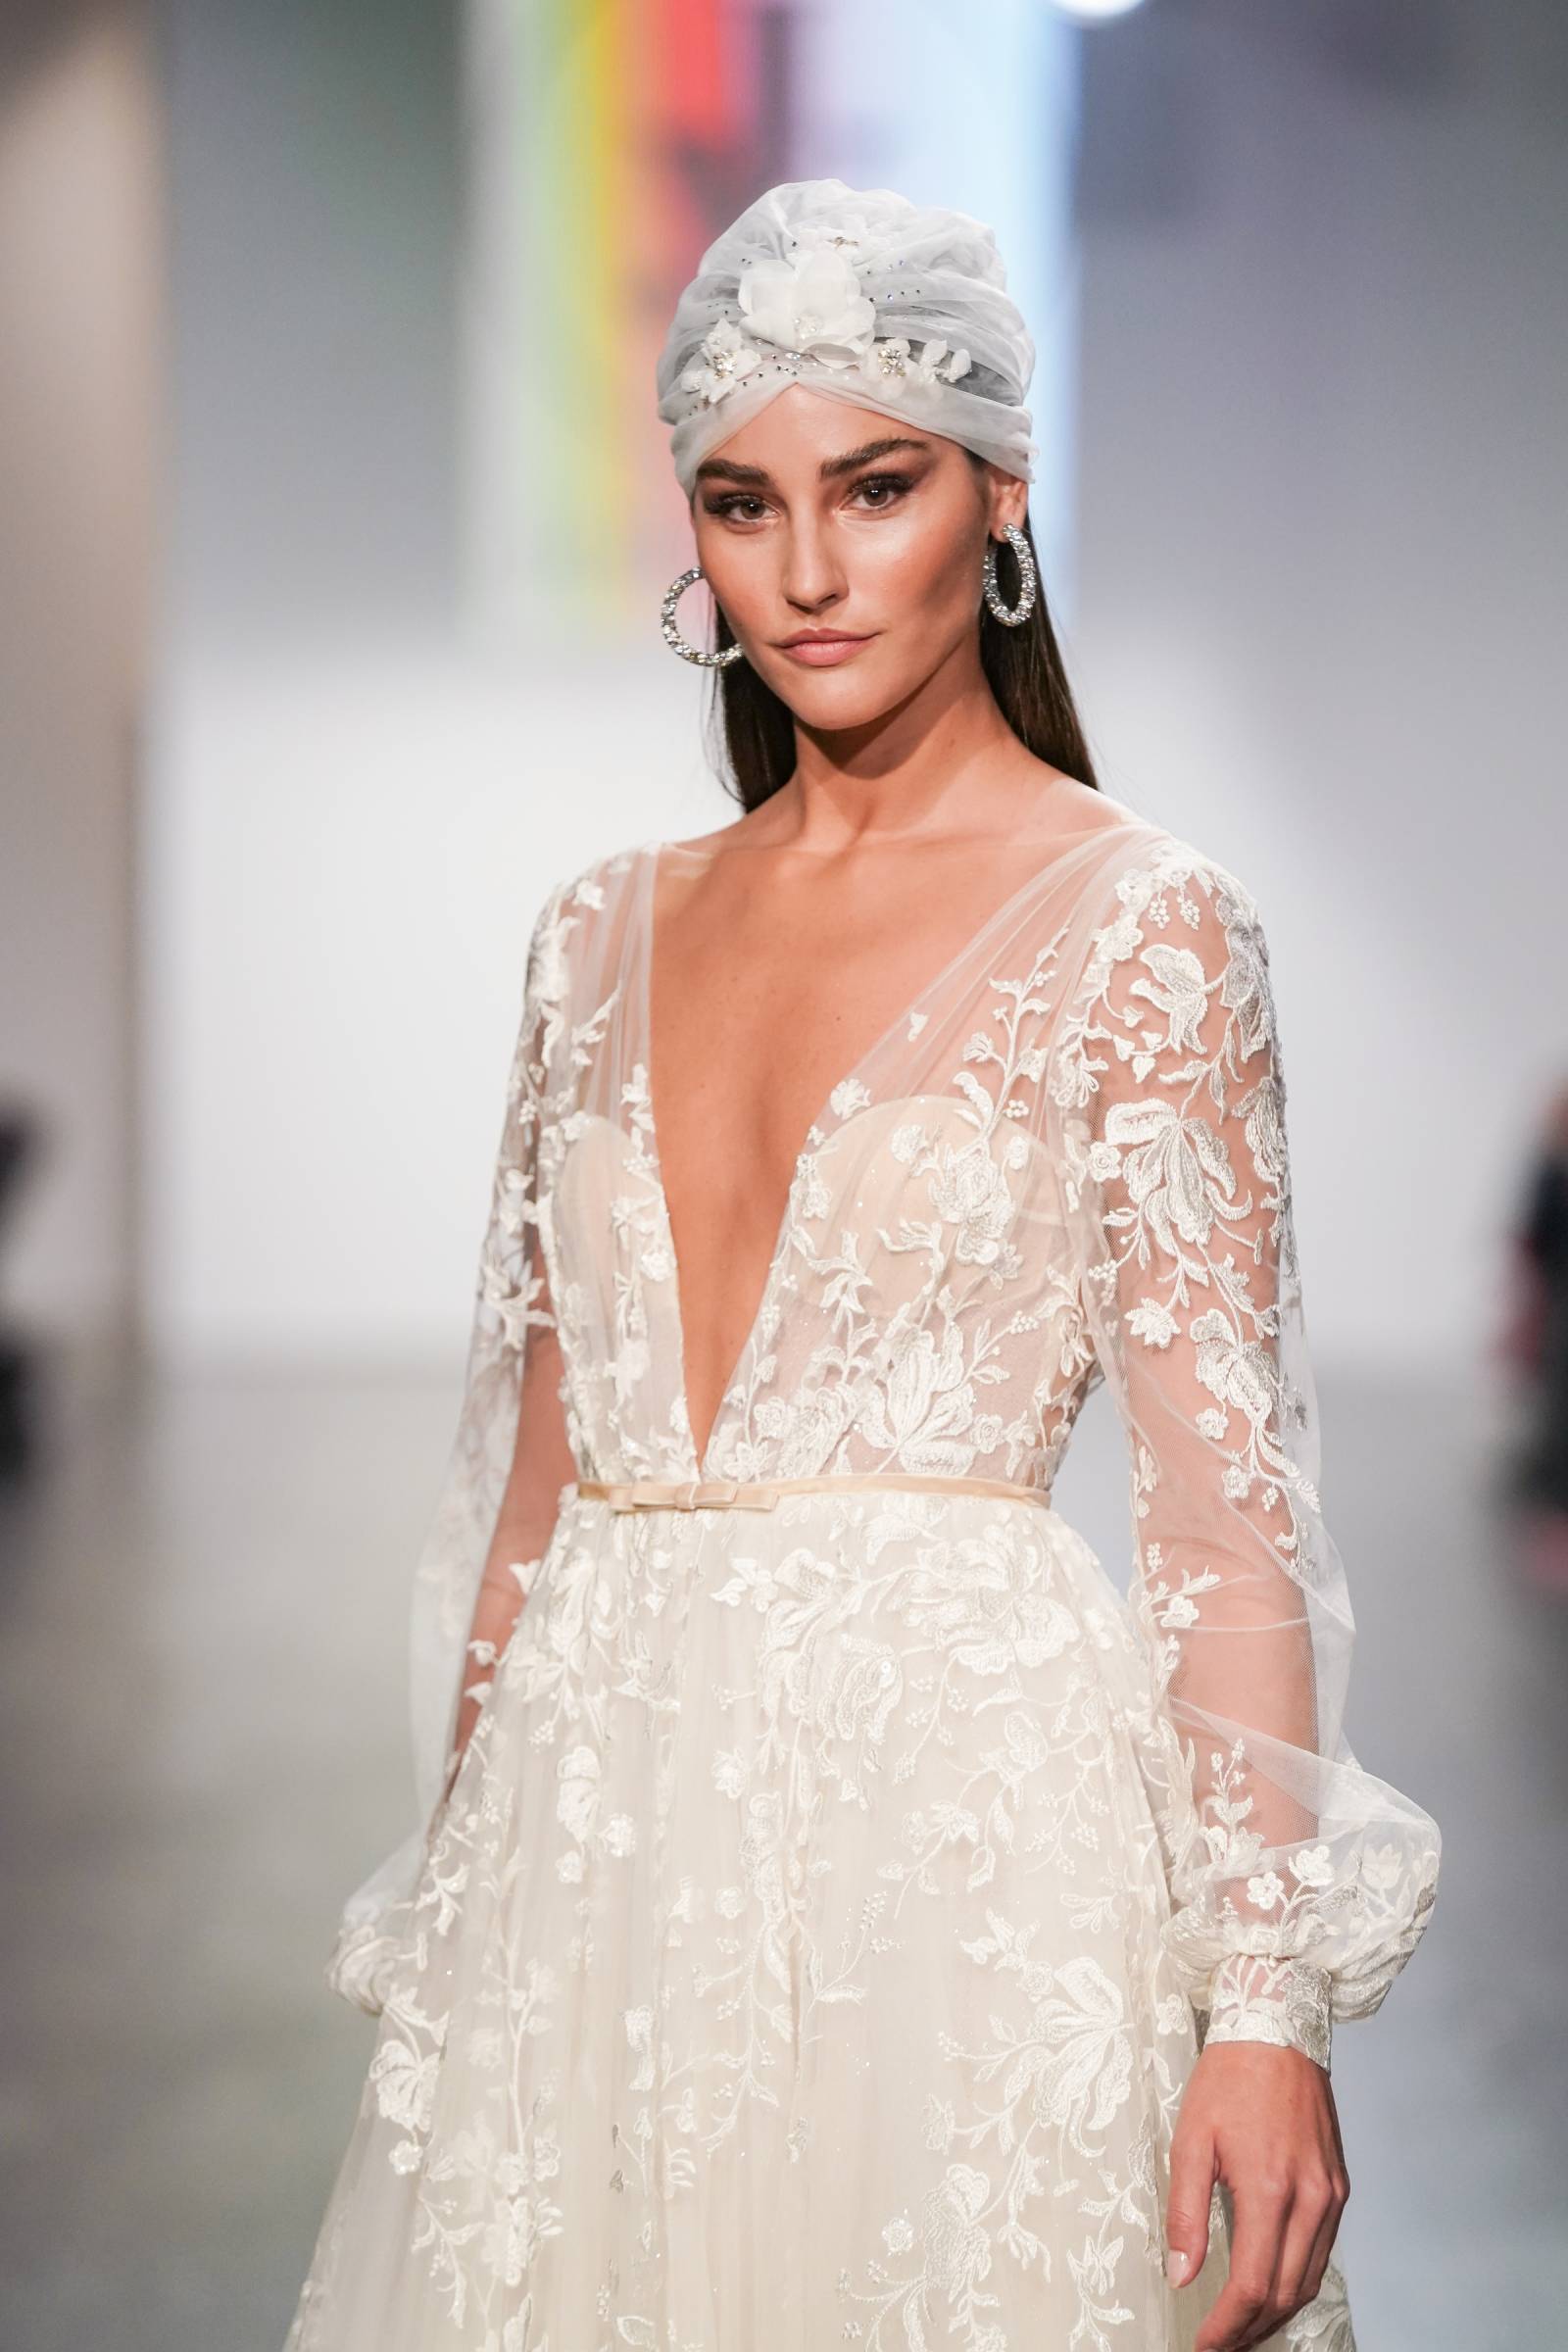 Wedding Dress Trends For Fall From New York Bridal Fashion Week